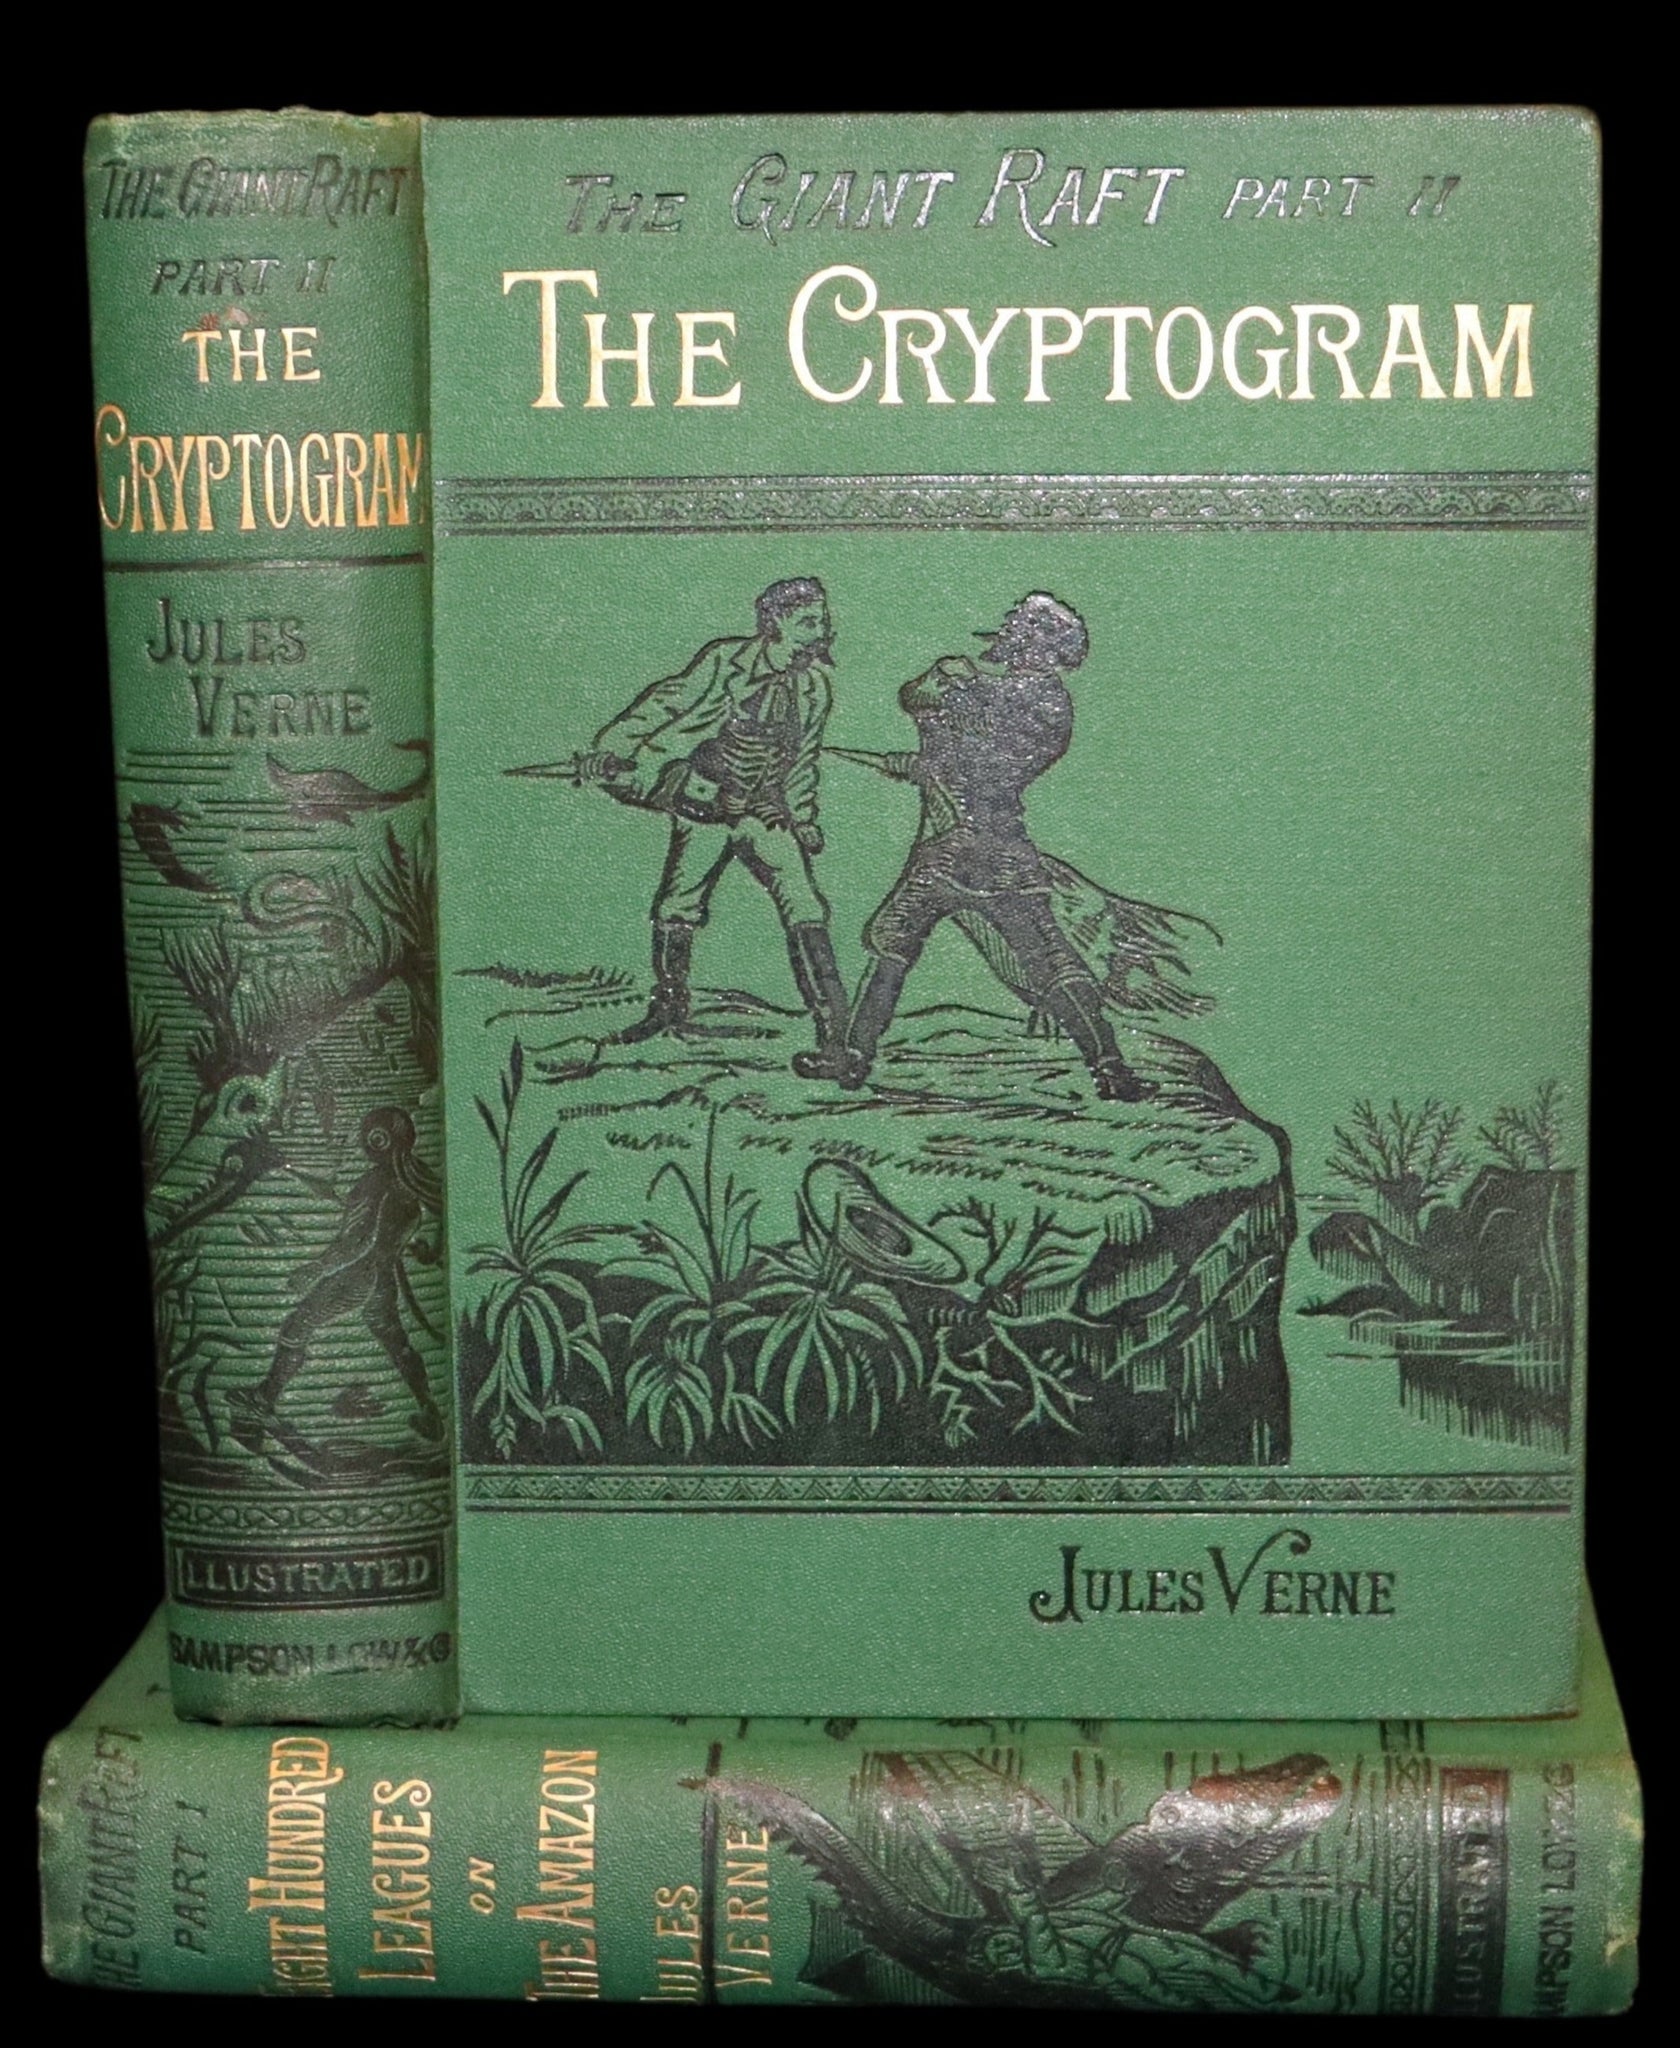 1885 Rare Complete set - Jules Verne The Giant Raft I & II. Eight Hundred Leagues on the Amazon & The Cryptogram.